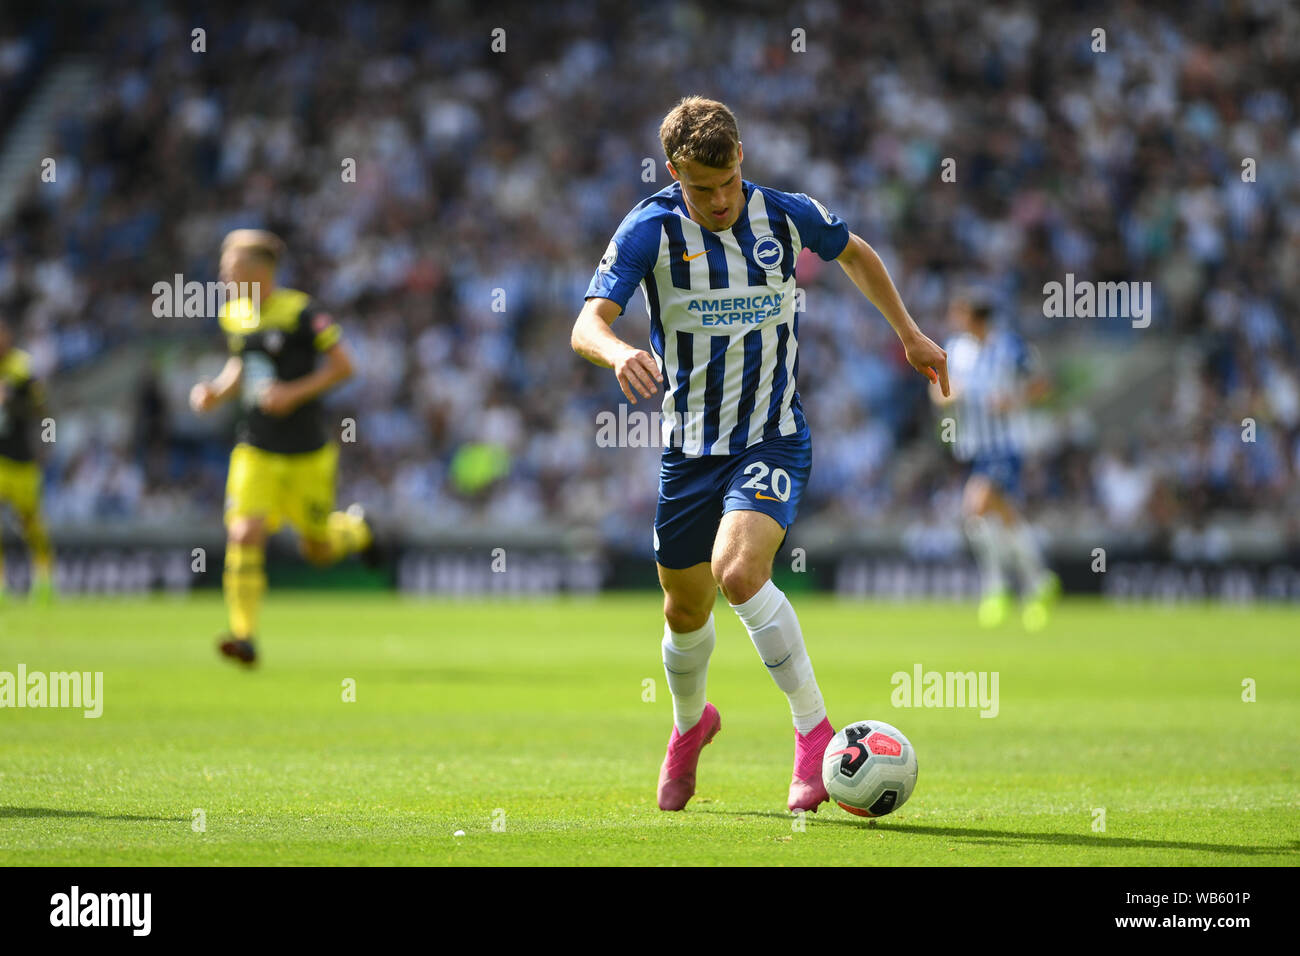 24th August 2019, American Express Community Stadium, Brighton, England; Premier League Football, Brighton vs Southampton ; Solly March (20) of Brighton runs with the ball  Credit: Phil Westlake/News Images  Premier League/EFL images are subject to DataCo Licence Stock Photo